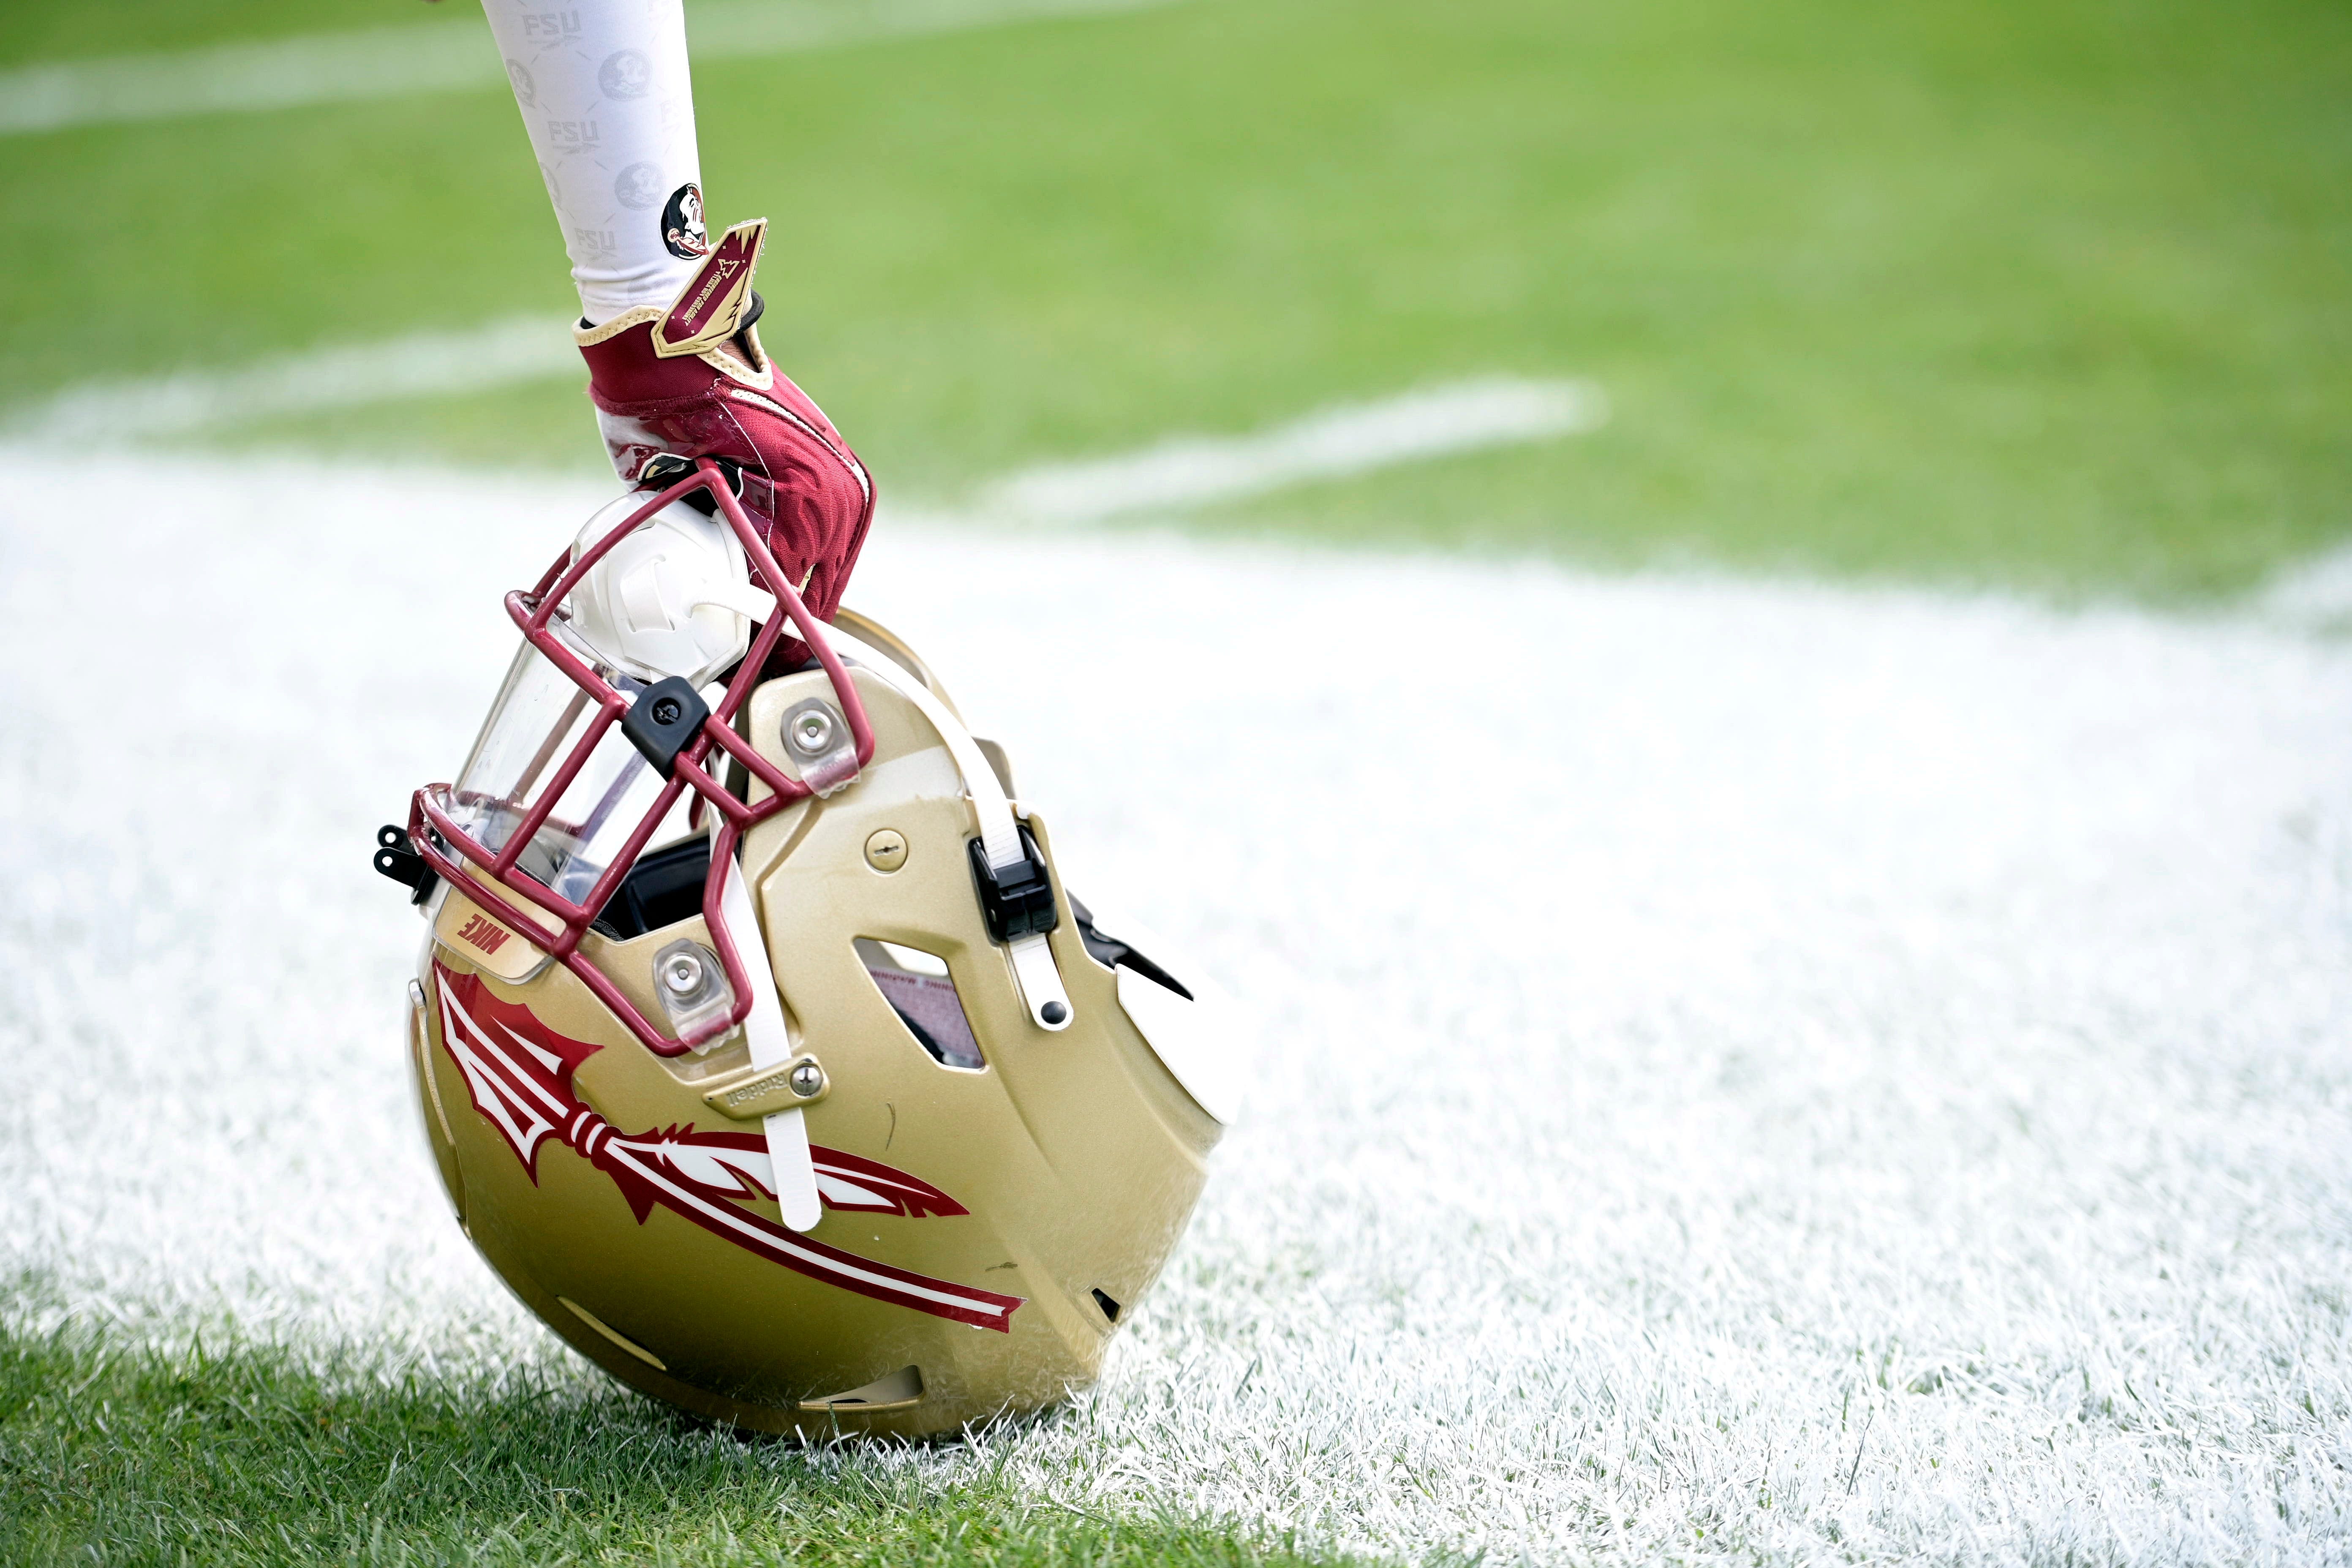 FSU asks North Carolina Supreme Court to review ACC lawsuit, legal rulings